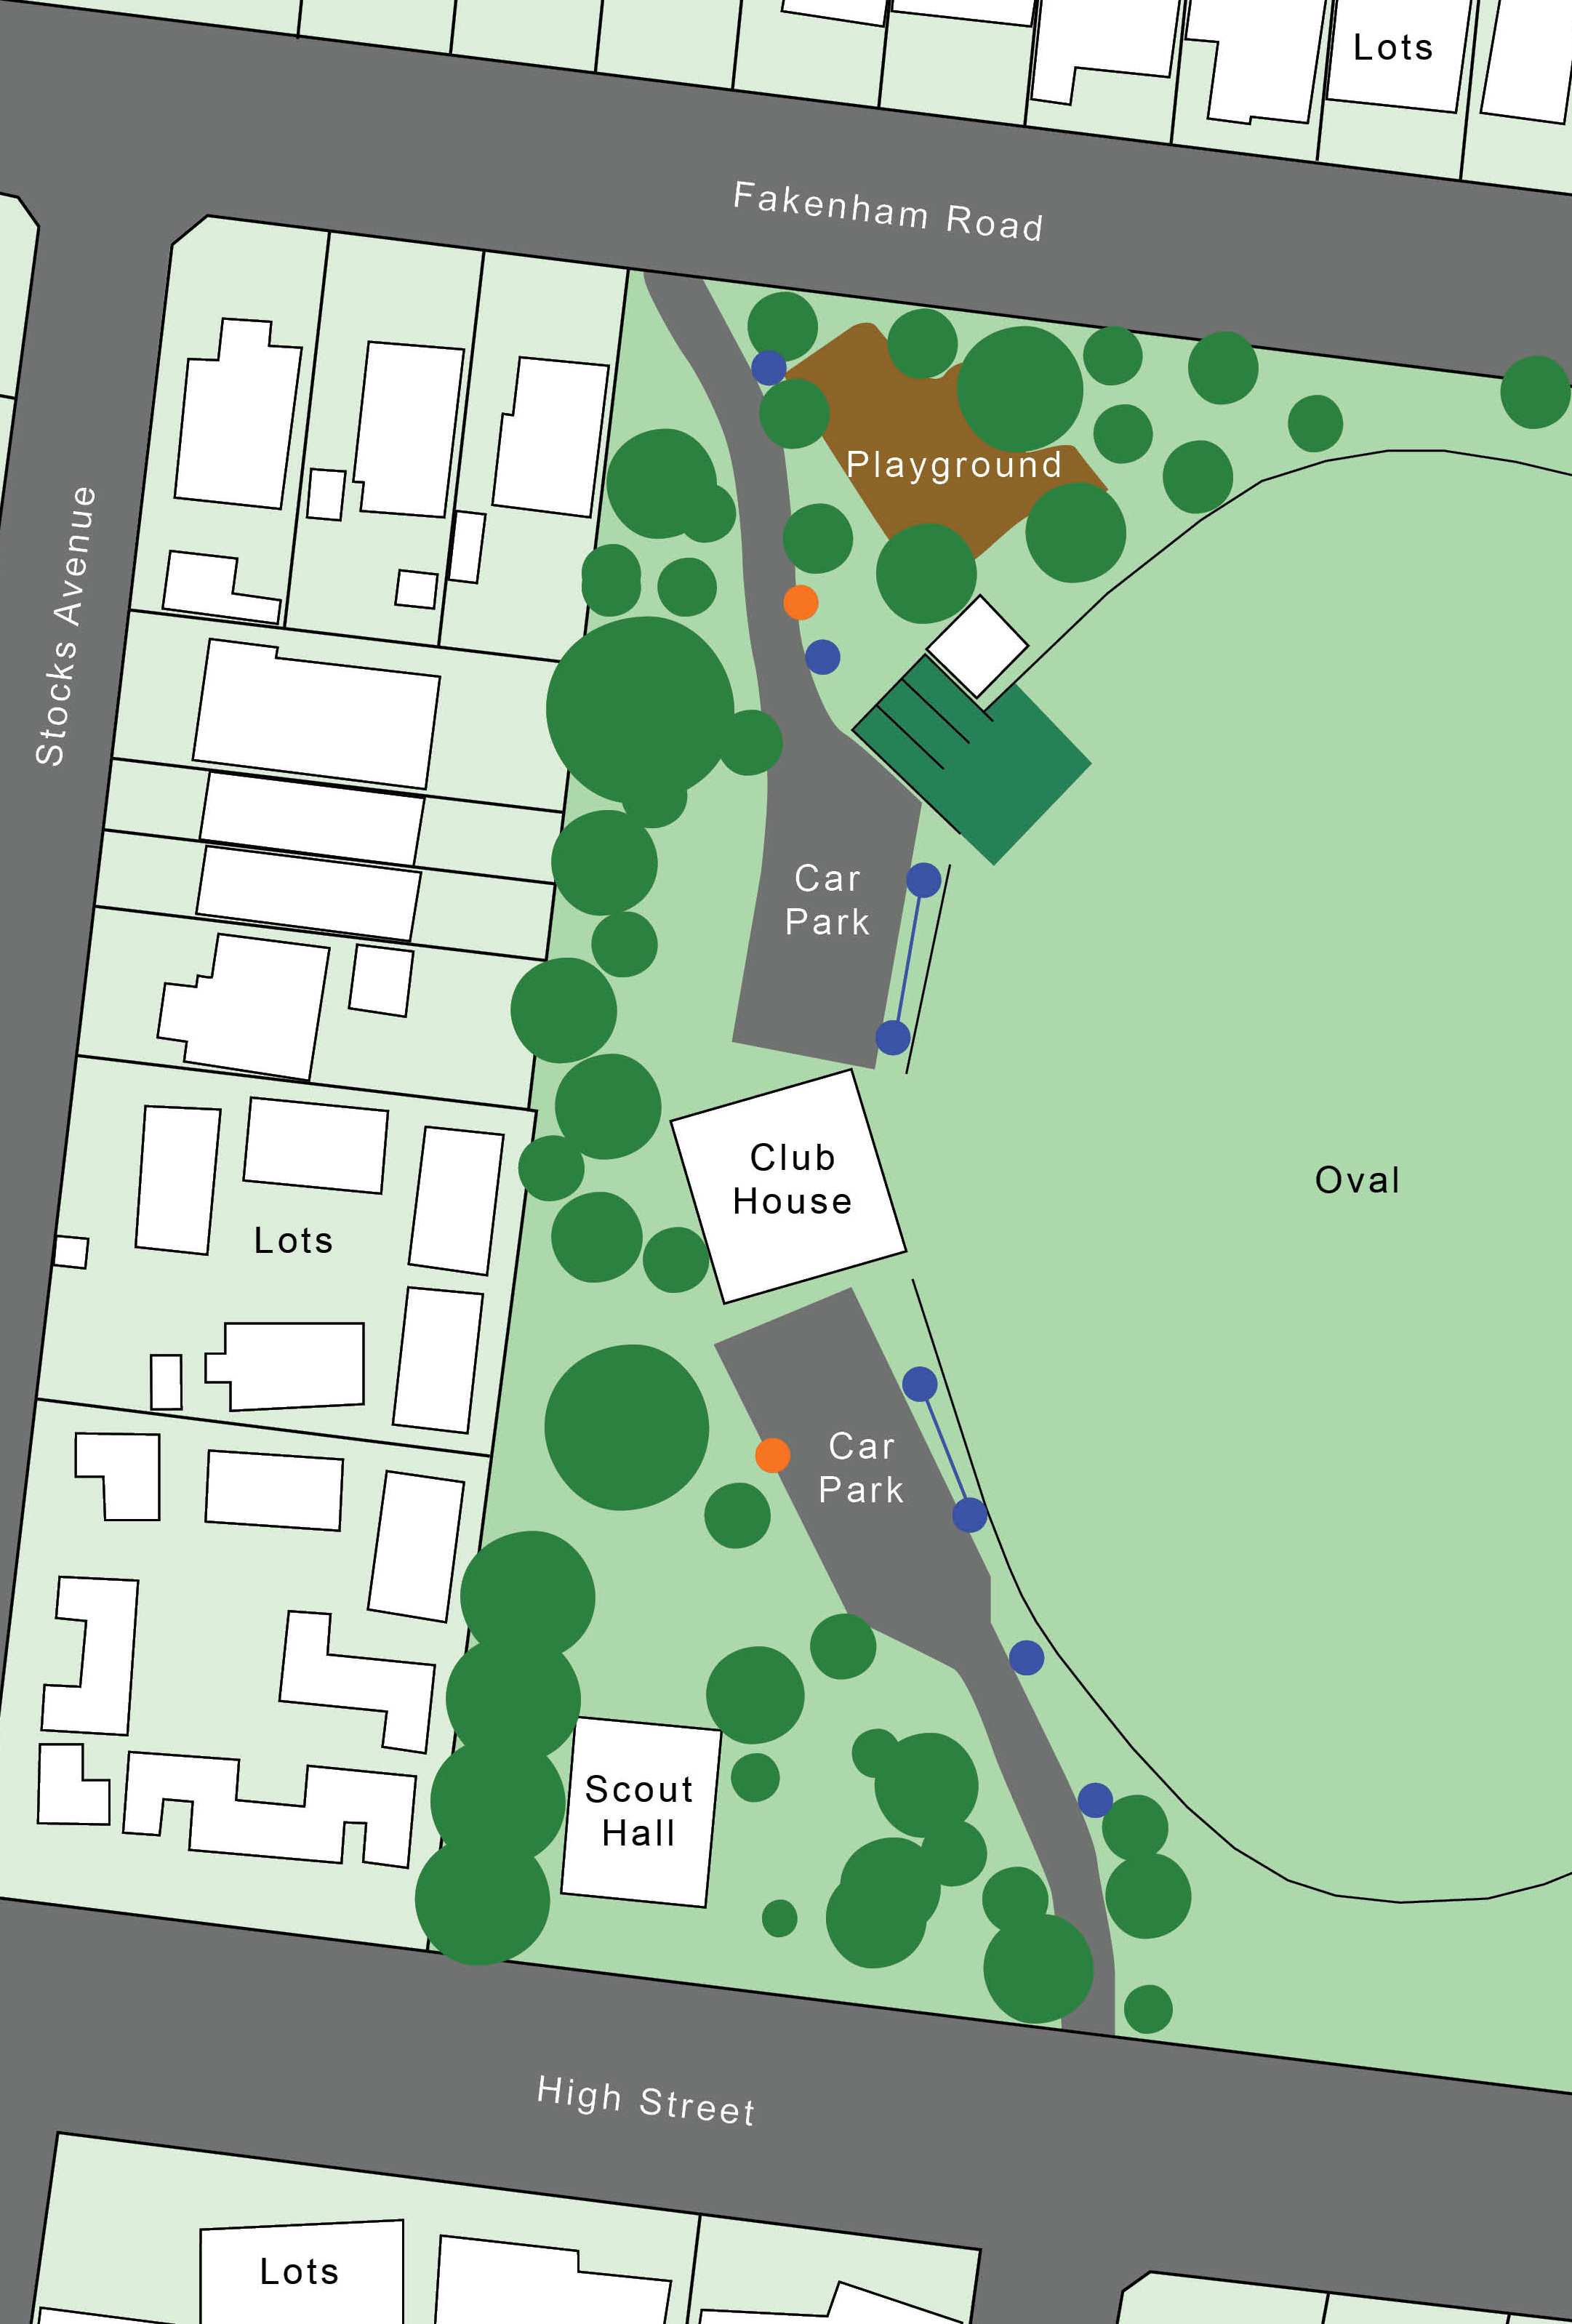 A map of Ashburton Park that uses blue circles to show where the new solar lights will be installed (subject to final design and site conditions), and orange circles to show where the existing lights powered by electricity will be removed (subject to authority approvals).